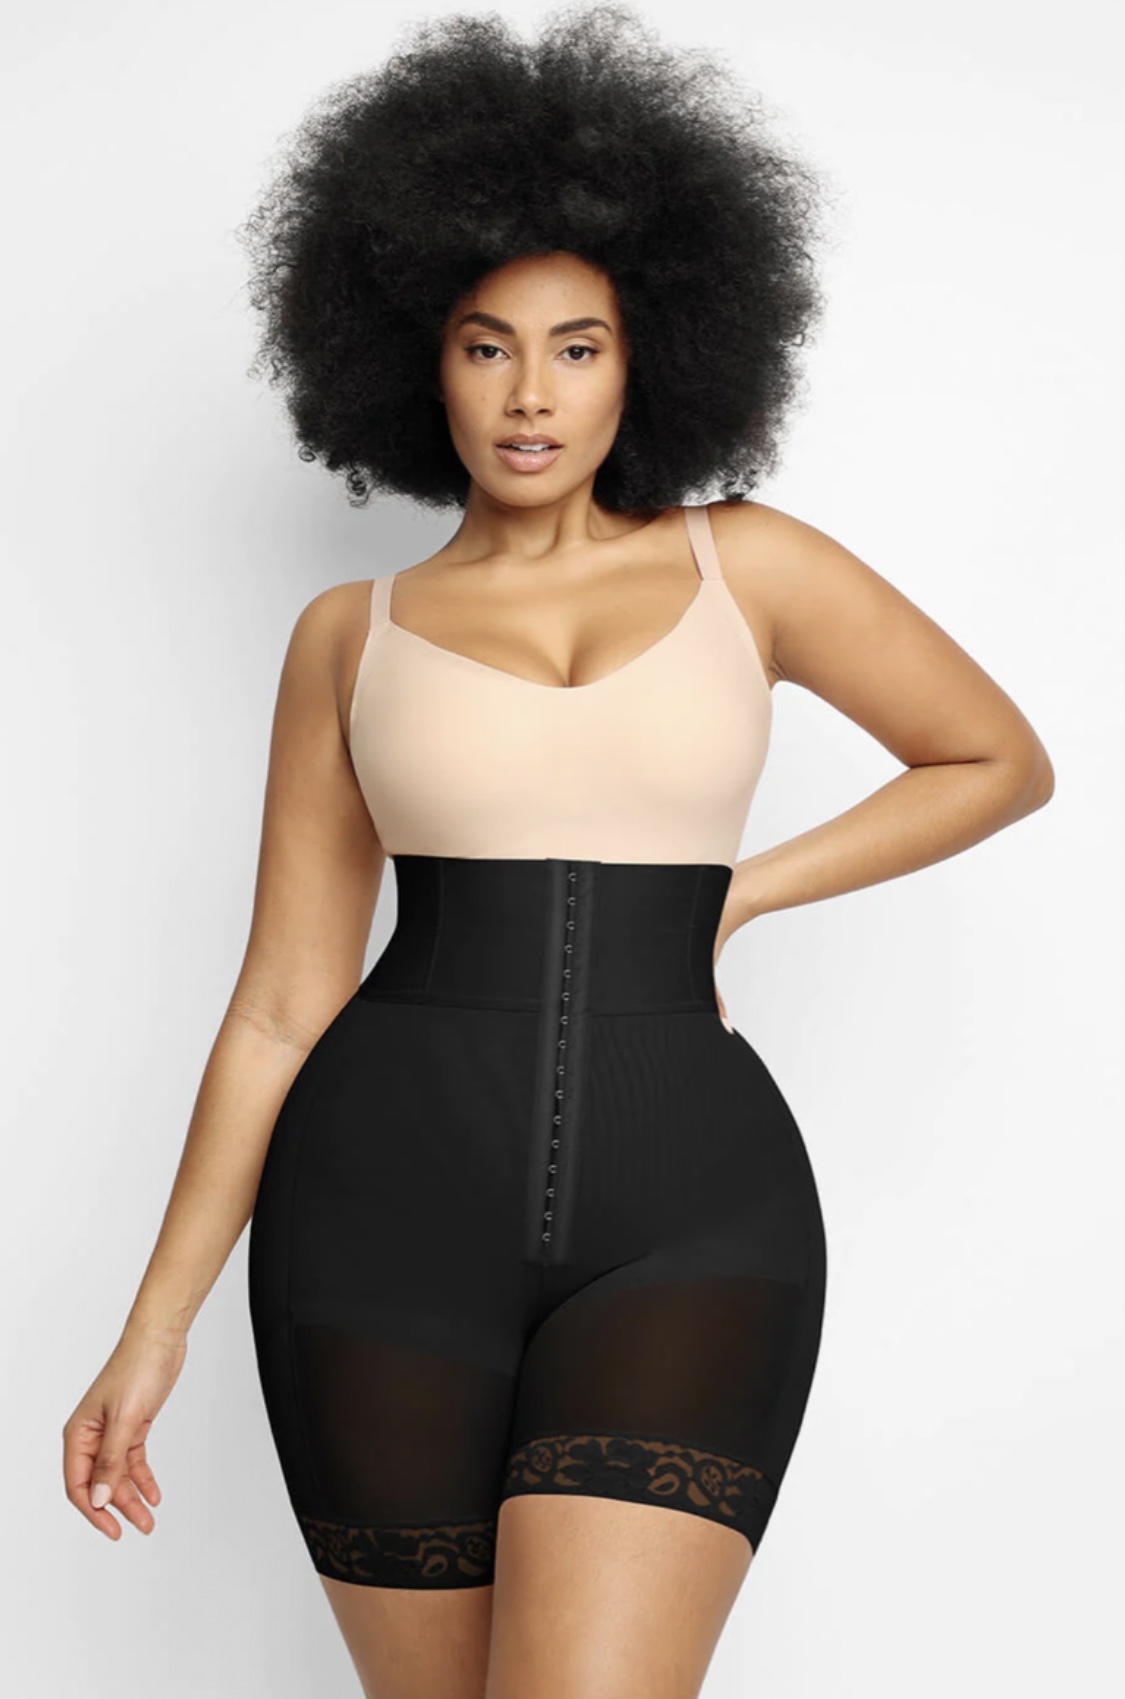 5 Recommended Shapewear on Shapellx - Firda Skin Journey